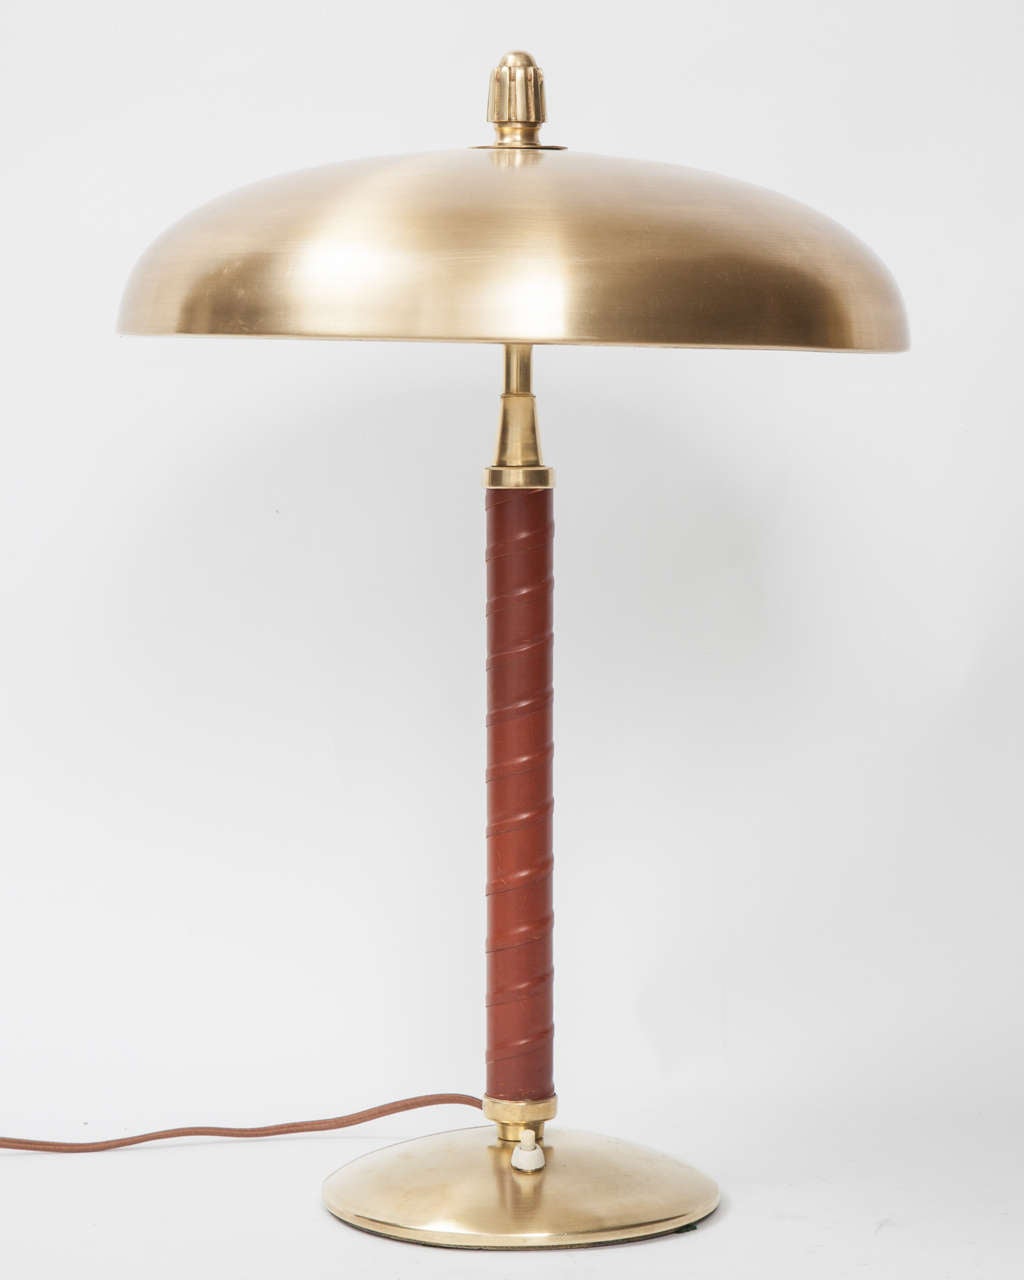 A Swedish Modern table lamp, Circa 1930-1940, with a polished brass dome shaped shade surmounted with a fluted finial, leather wrapped stem and circular brass base. Probably made by Einar Bäckström Metallvarufabrik, Malmo. or Zenith Rewired to US